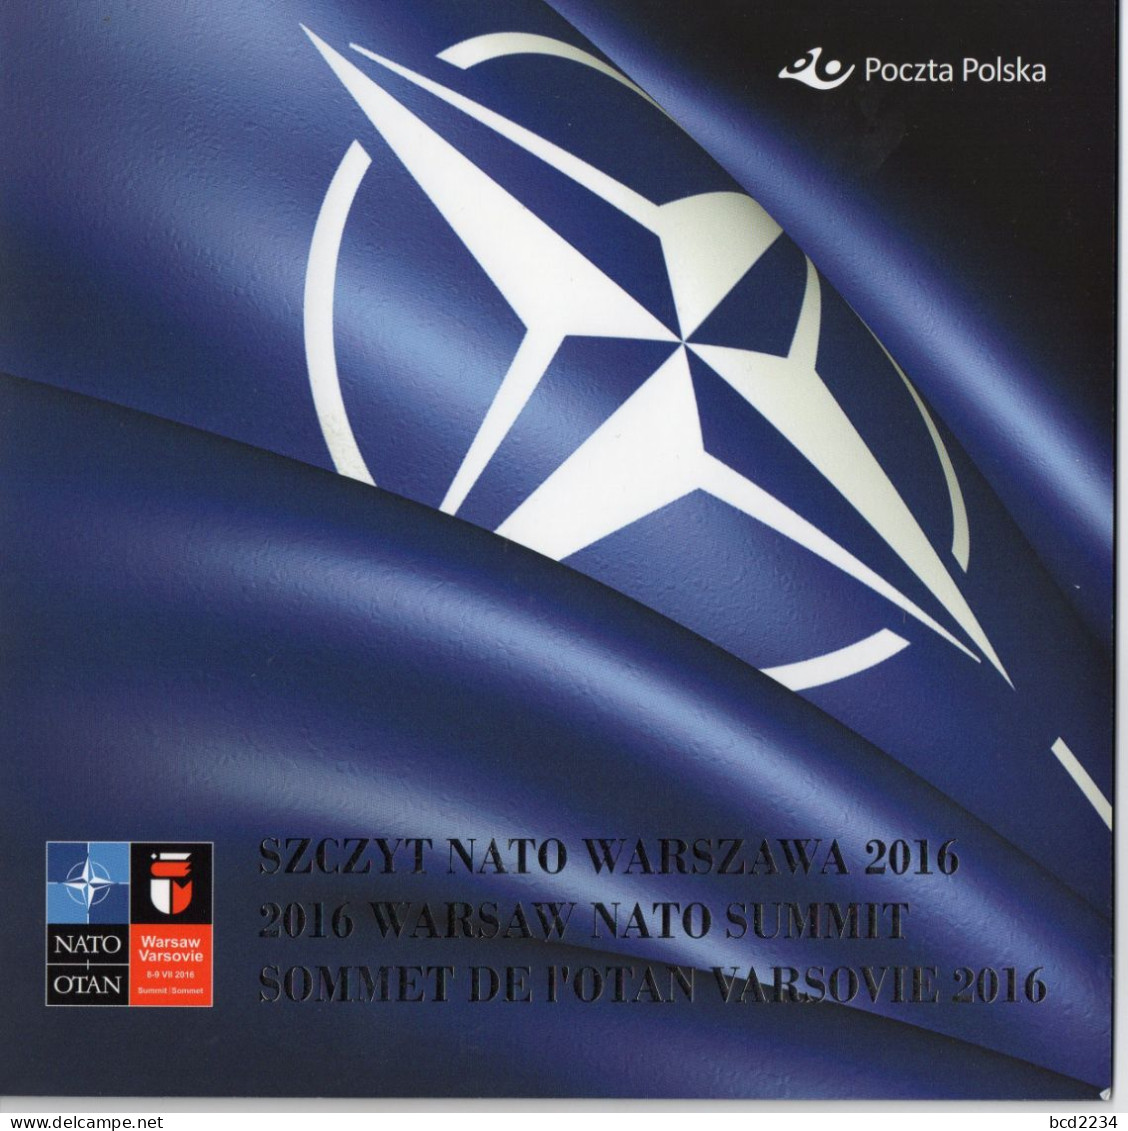 POLAND 2016 POLISH POST SPECIAL LIMITED EDITION FOLDER: WARSAW NATO SUMMIT NHM & FDC & SPECIAL ENVELOPE - FDC